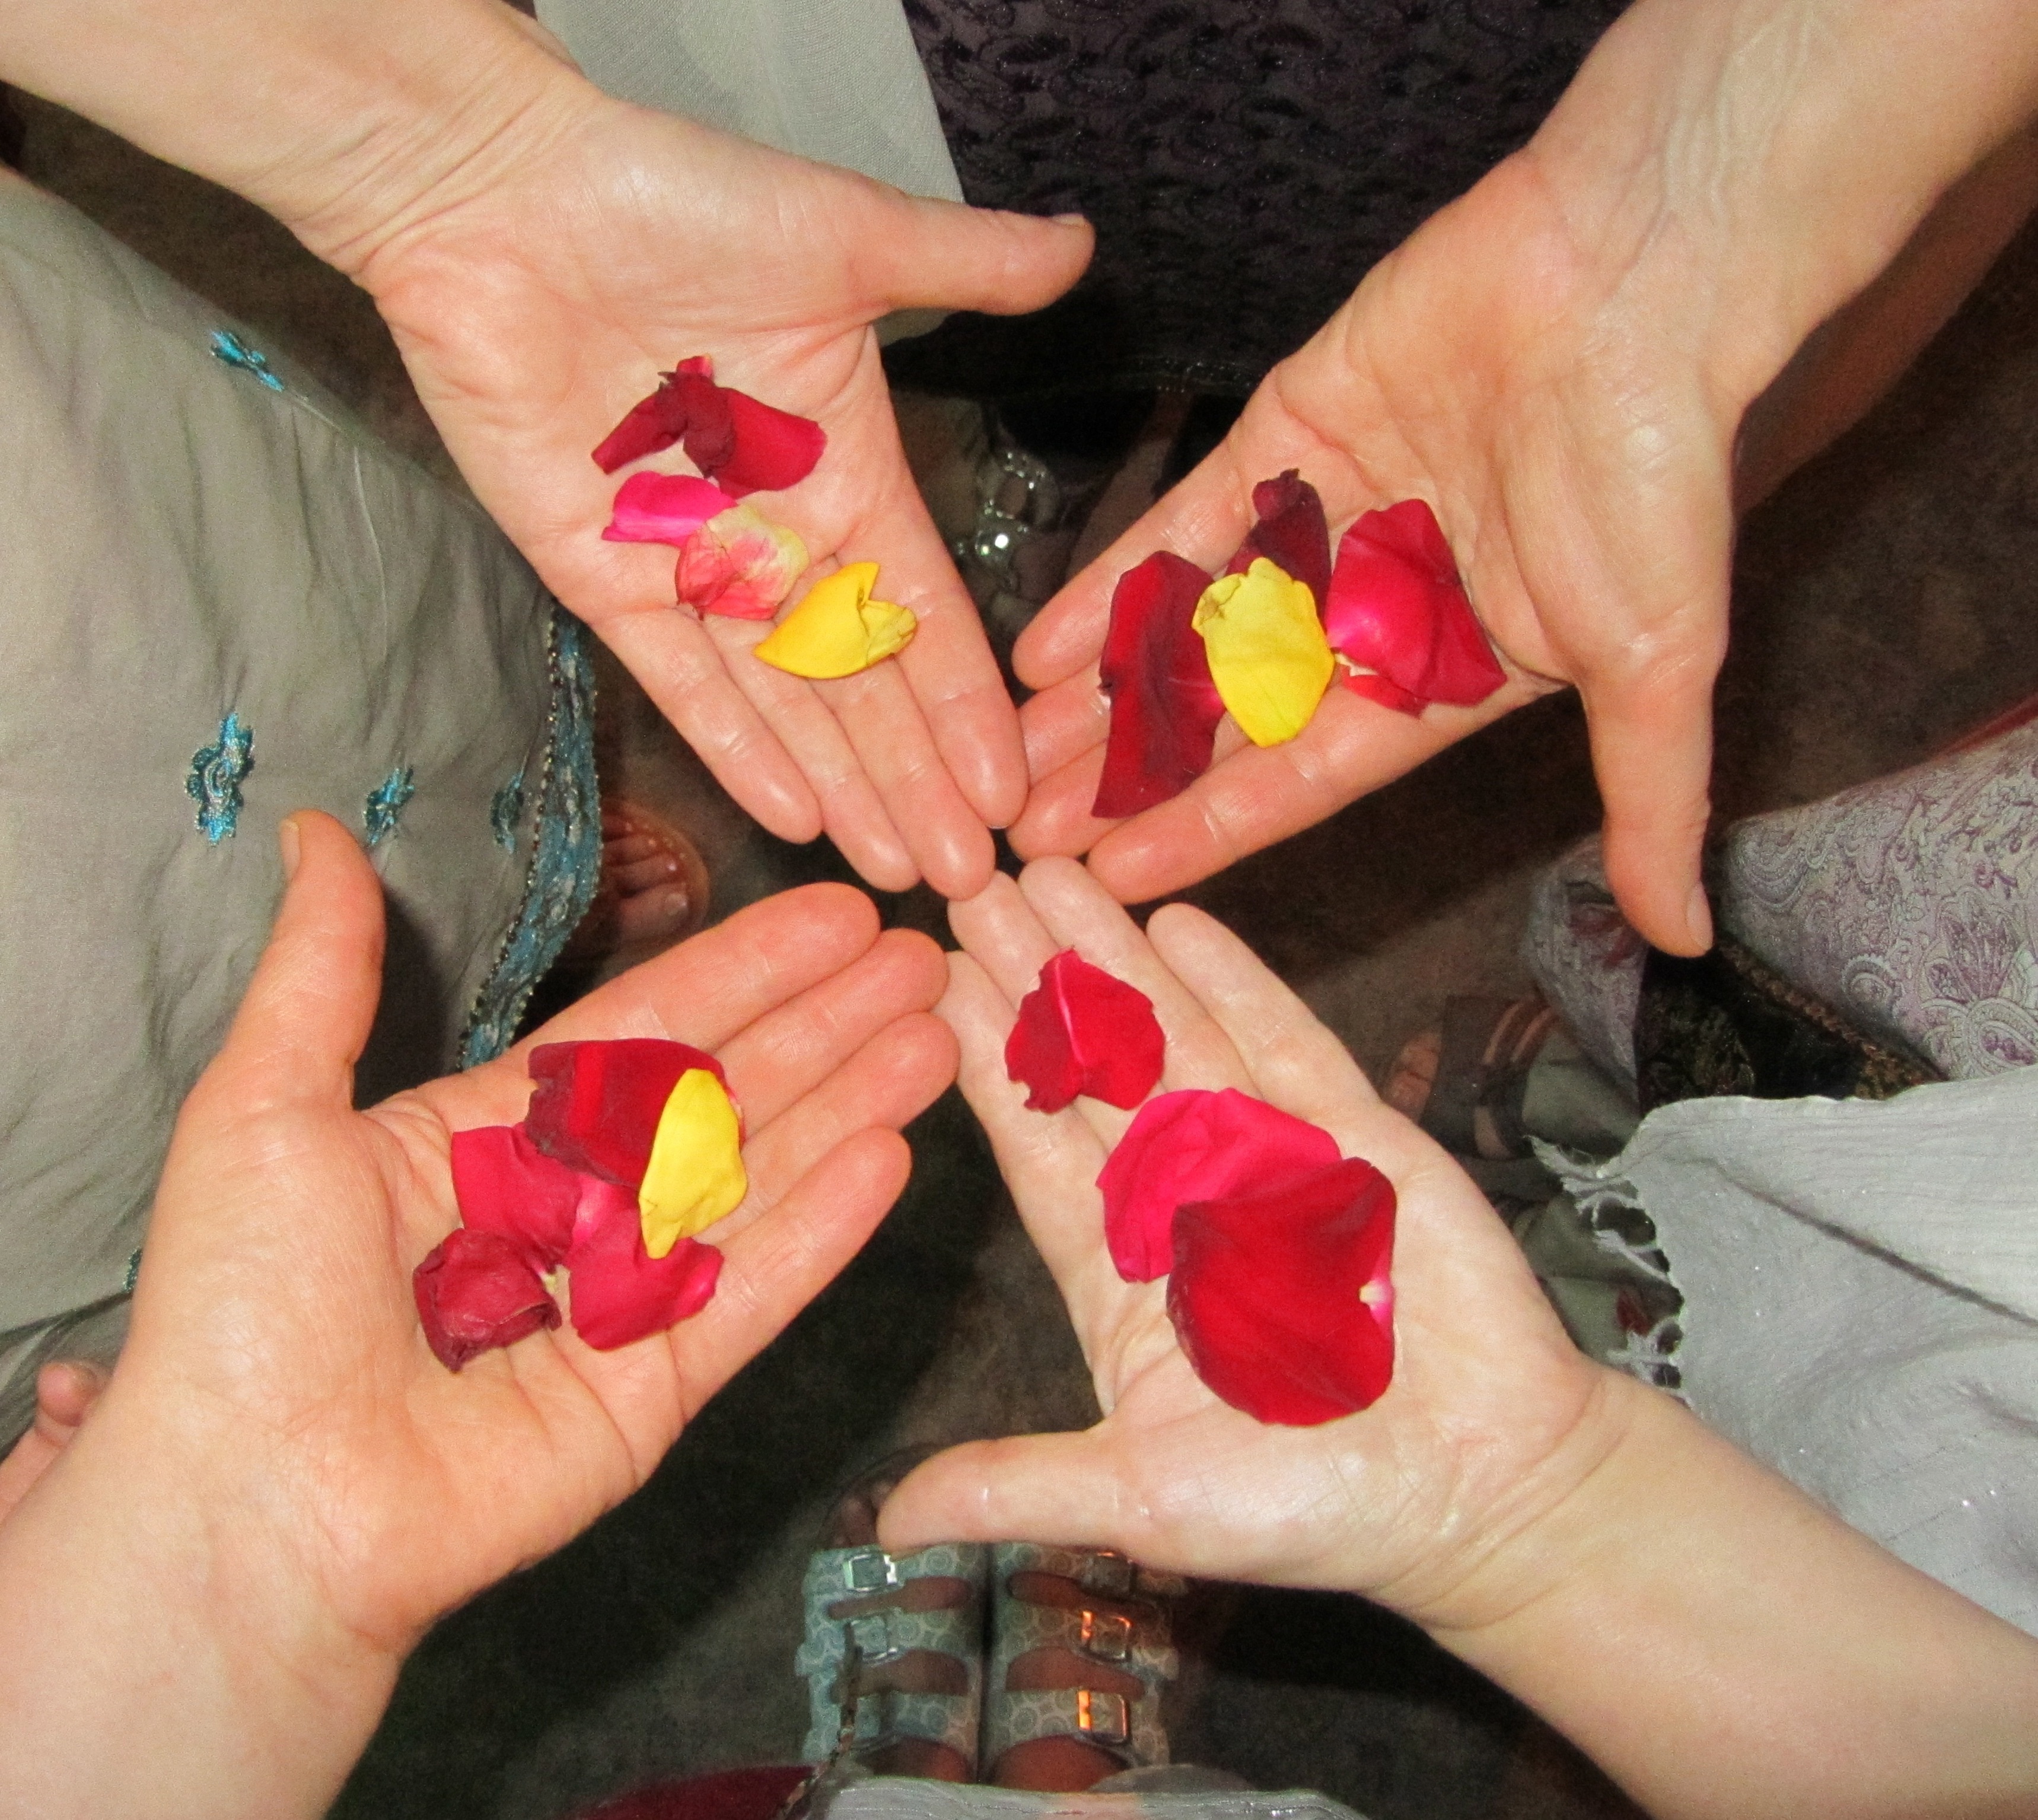 four person holding red and yellow rose petals